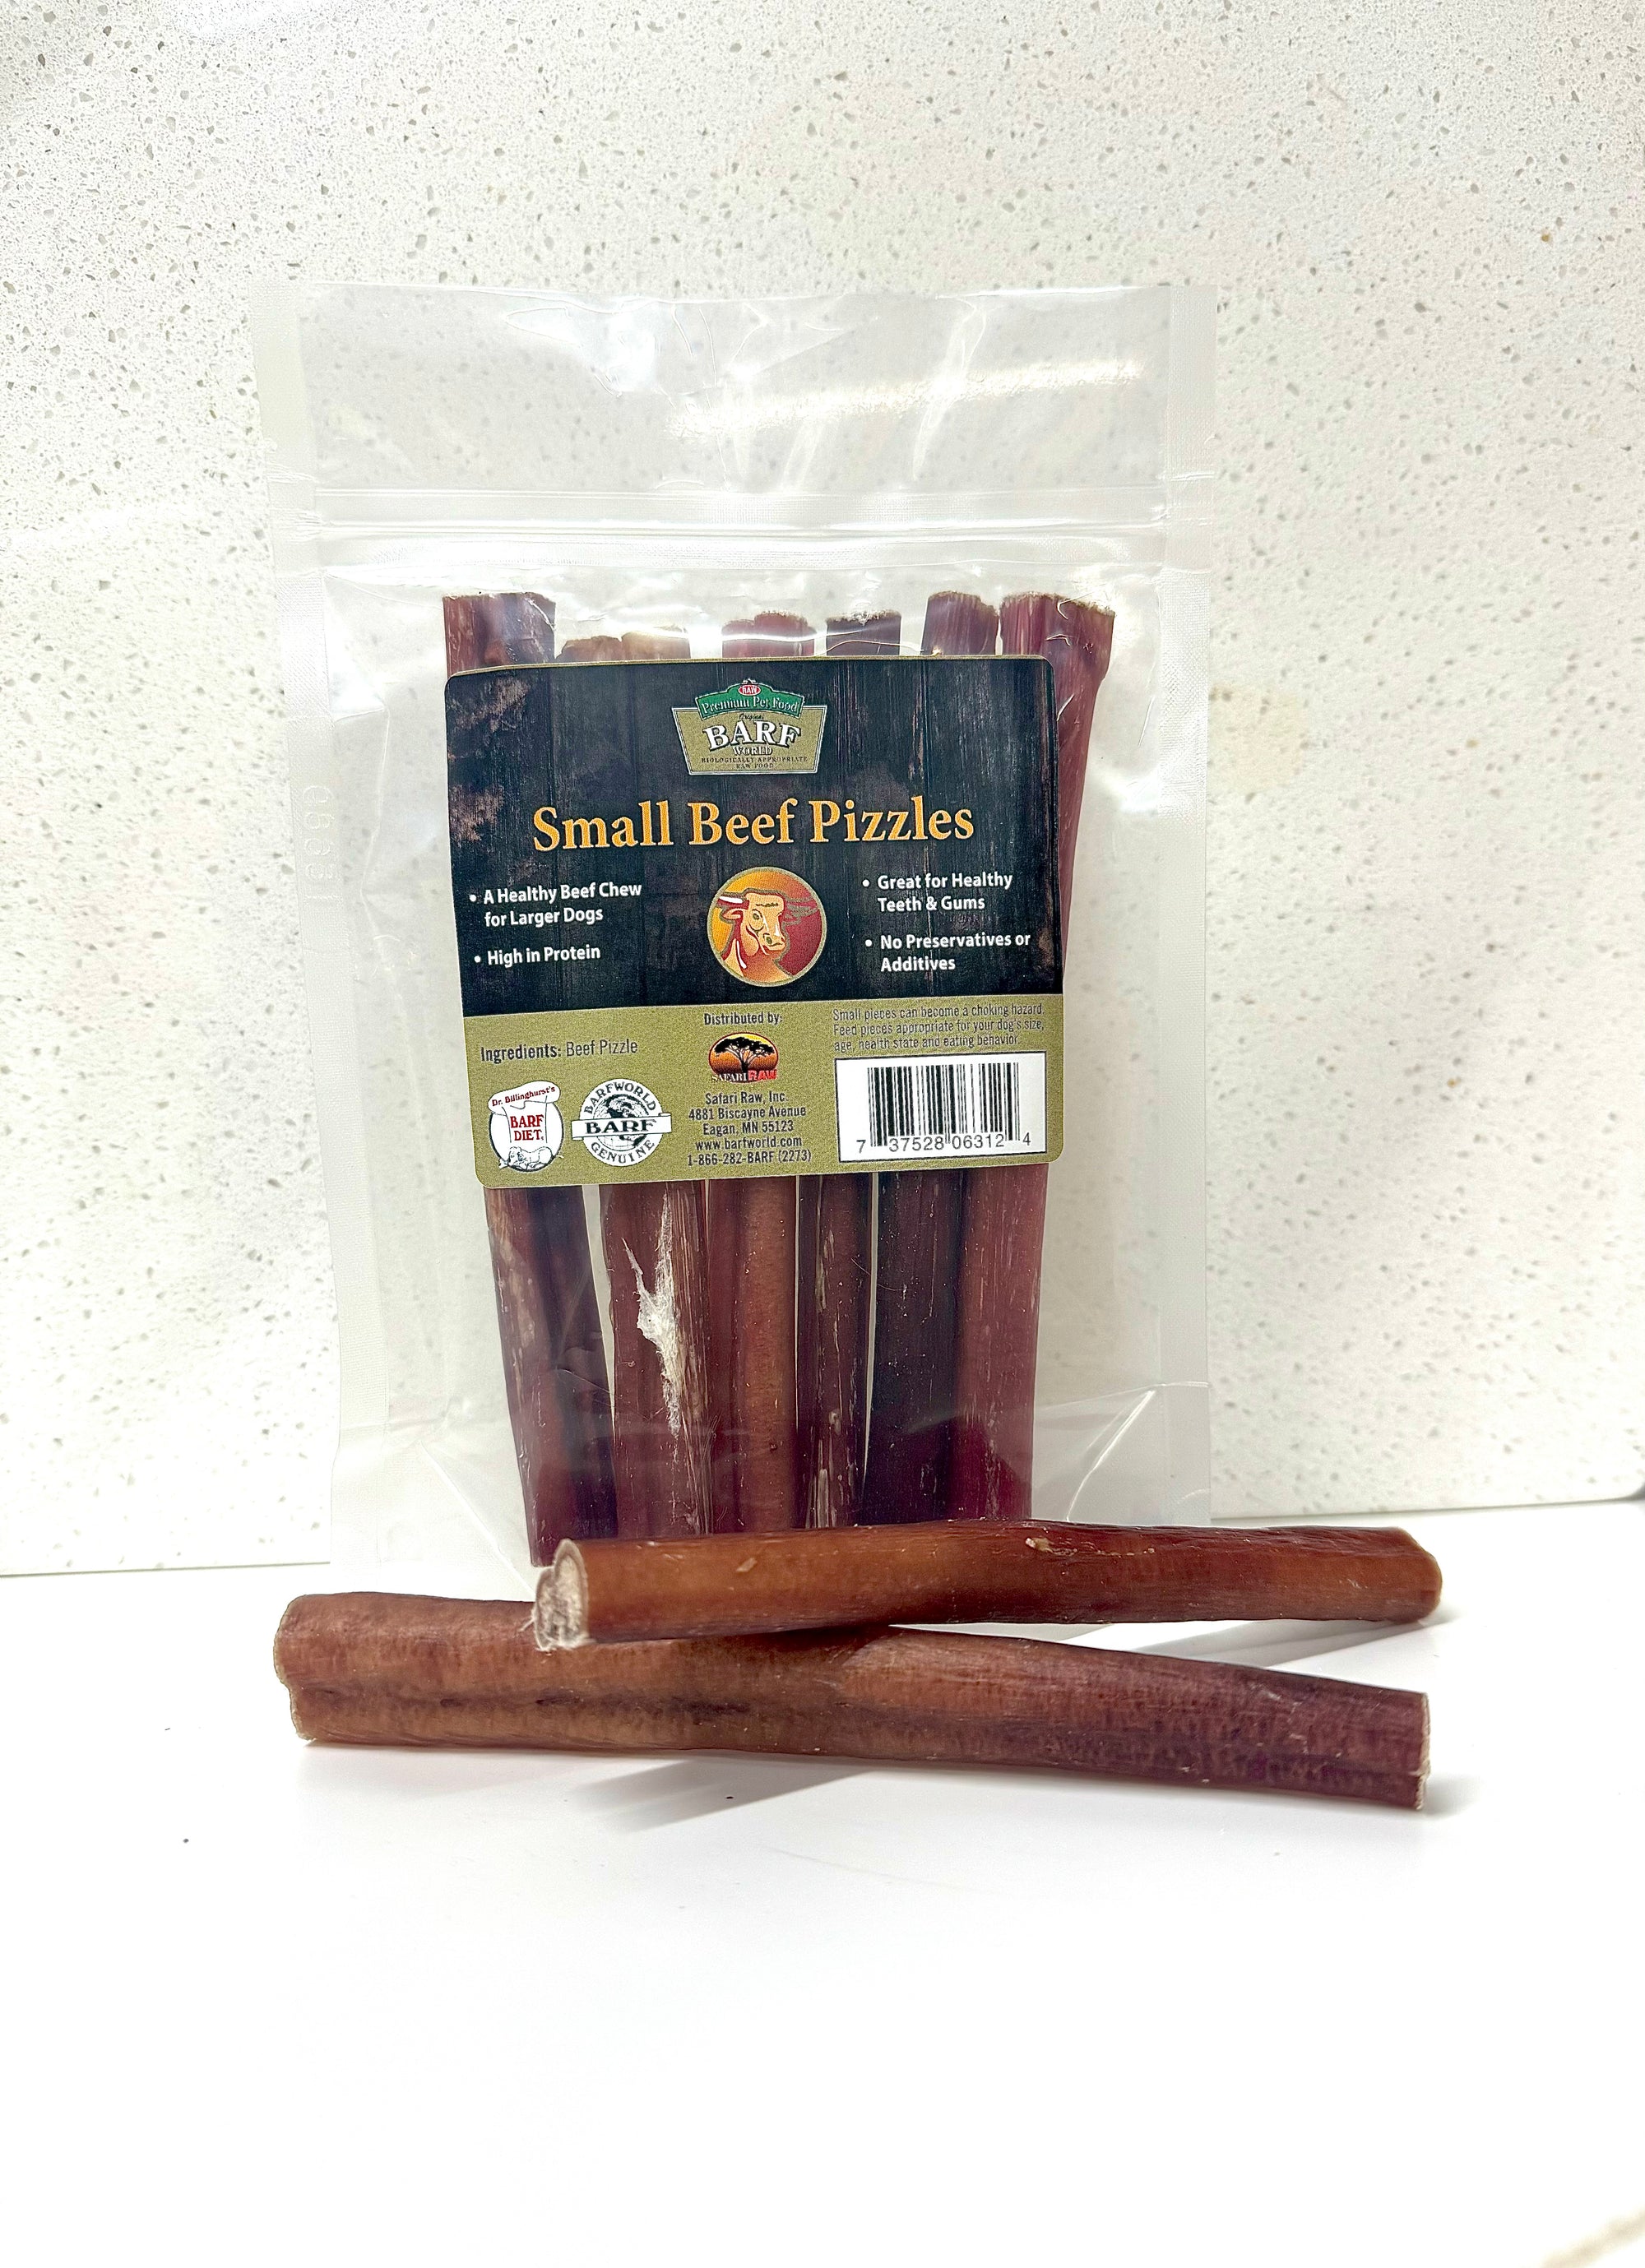 Package of small beef pizzle sticks for dogs